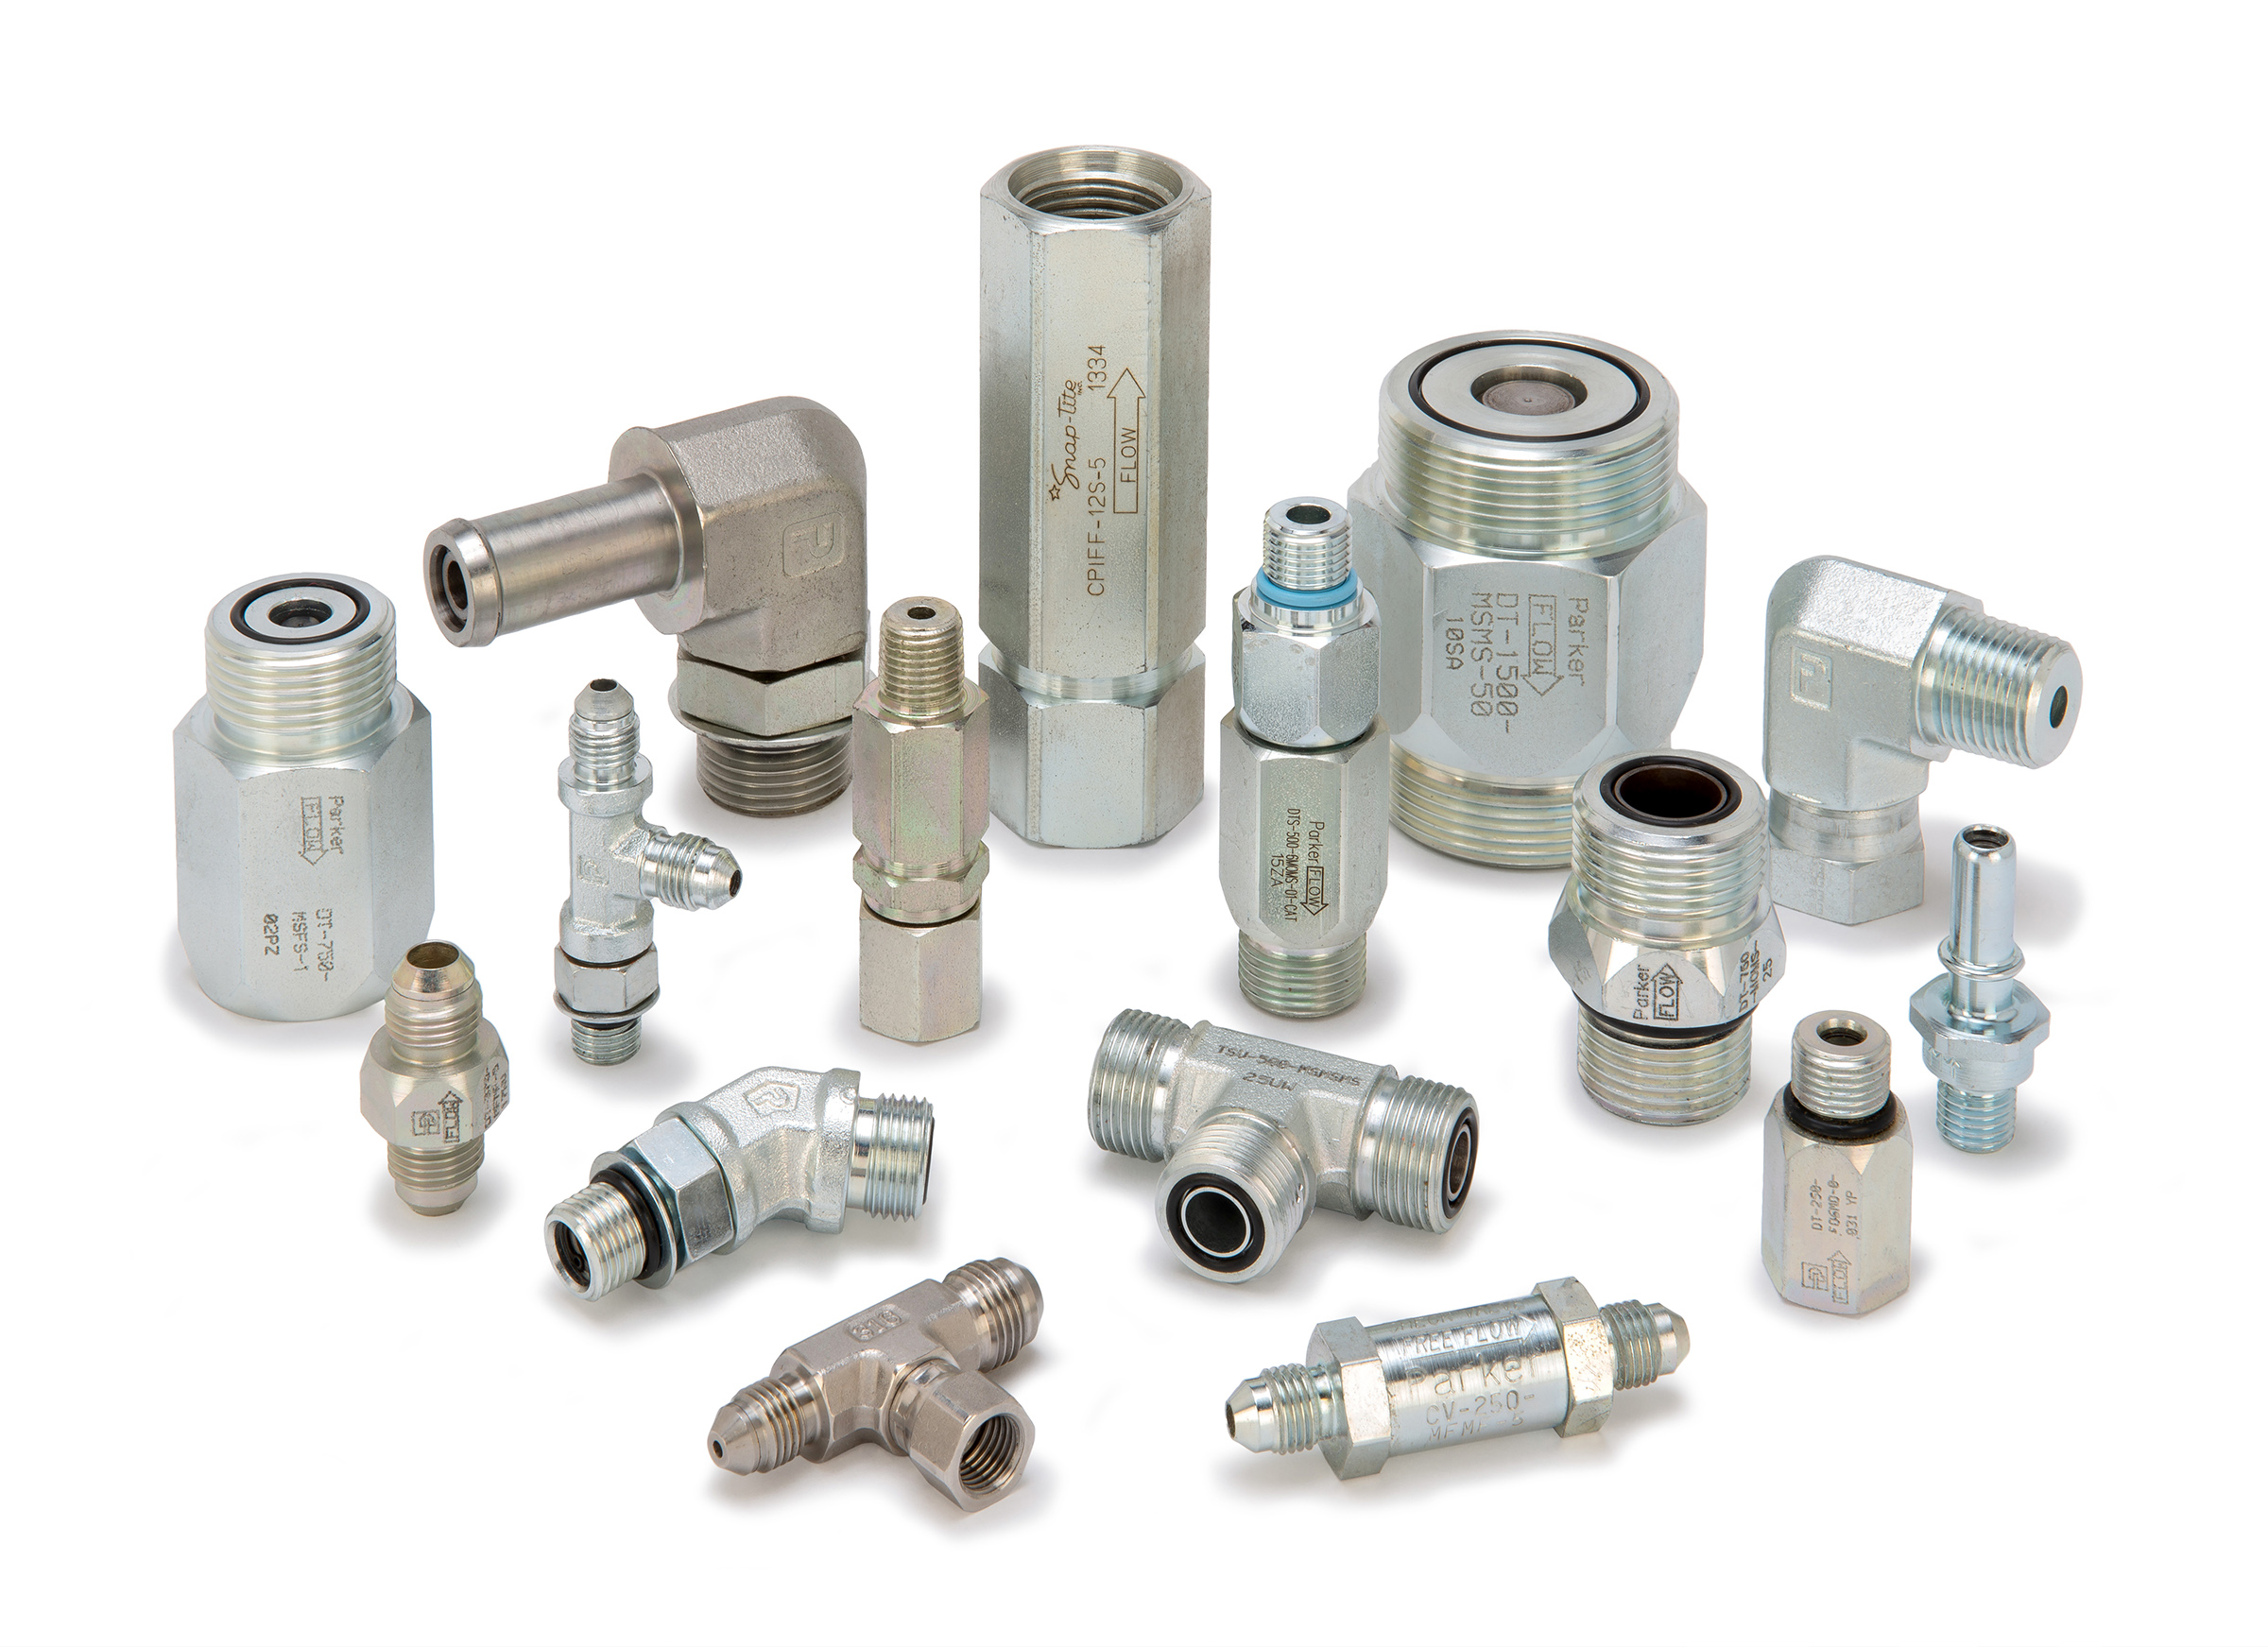 Check valves are found in just about every mobile and industrial hydraulic system on the planet